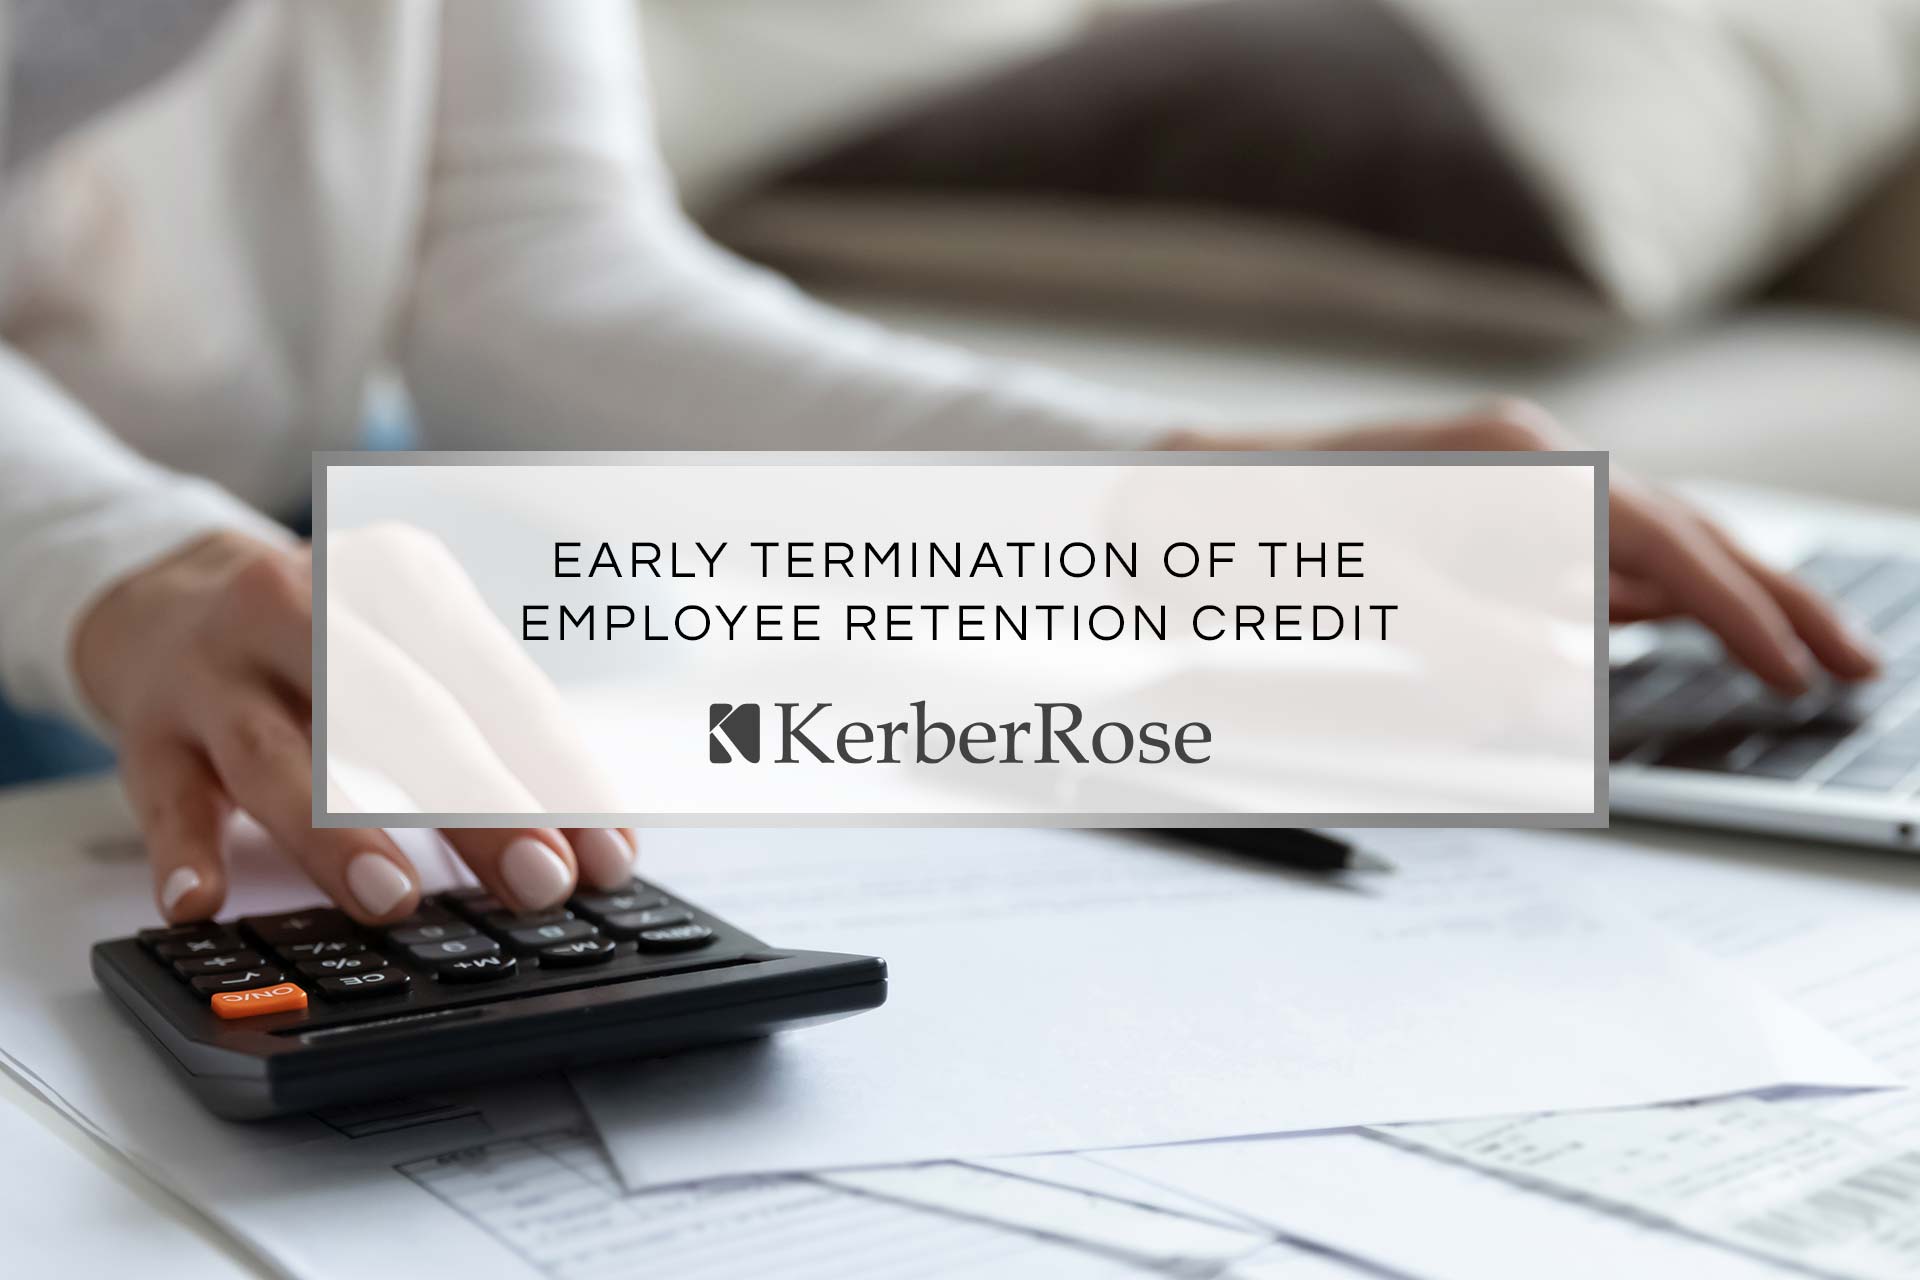 Early Termination of the Employee Retention Credit: What You Need to Know